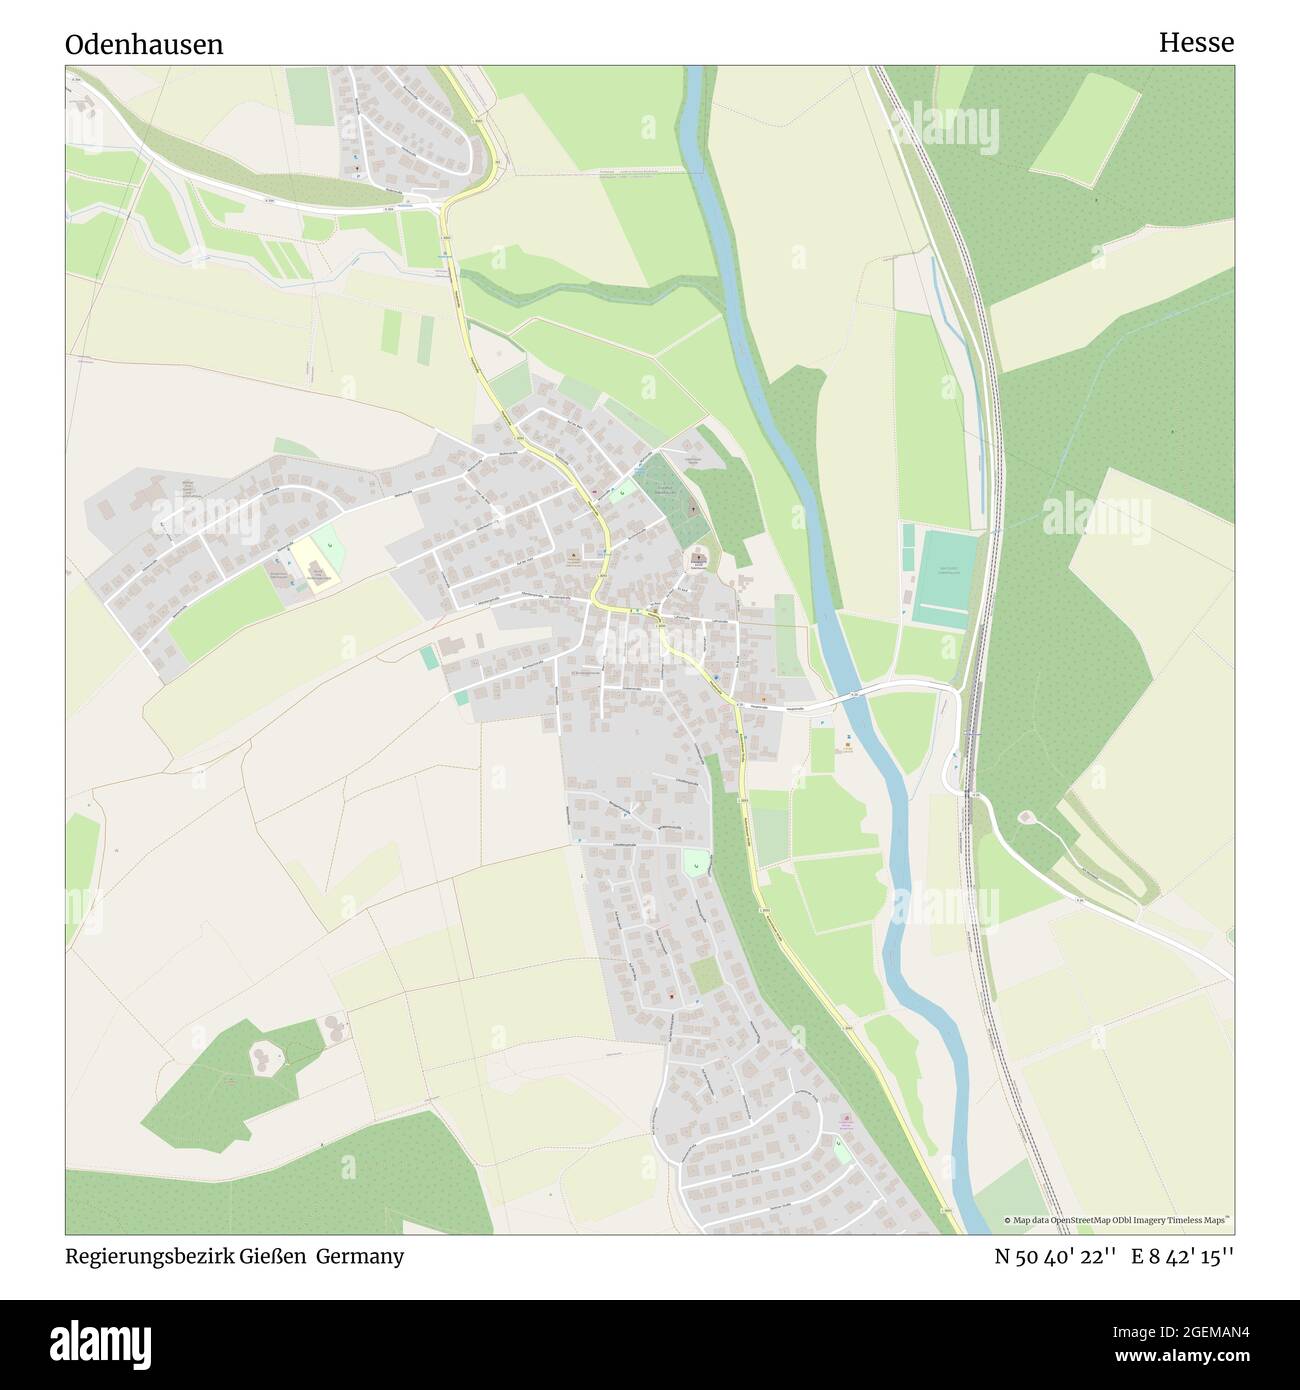 Odenhausen, Regierungsbezirk Gießen, Germany, Hesse, N 50 40' 22'', E 8 42' 15'', map, Timeless Map published in 2021. Travelers, explorers and adventurers like Florence Nightingale, David Livingstone, Ernest Shackleton, Lewis and Clark and Sherlock Holmes relied on maps to plan travels to the world's most remote corners, Timeless Maps is mapping most locations on the globe, showing the achievement of great dreams Stock Photo